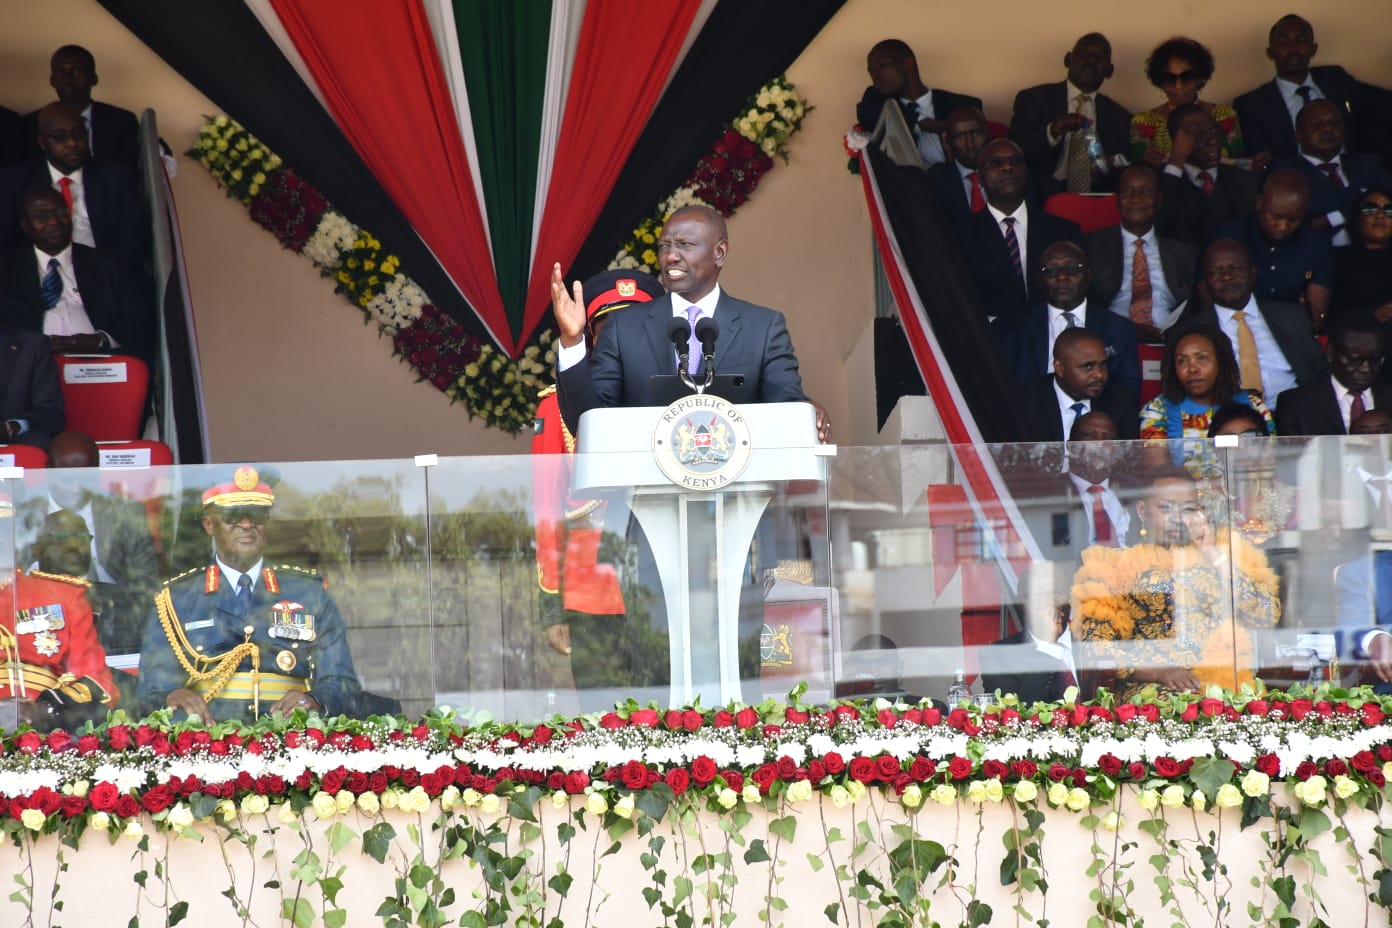 RUTO: All sovereign power belongs to the people